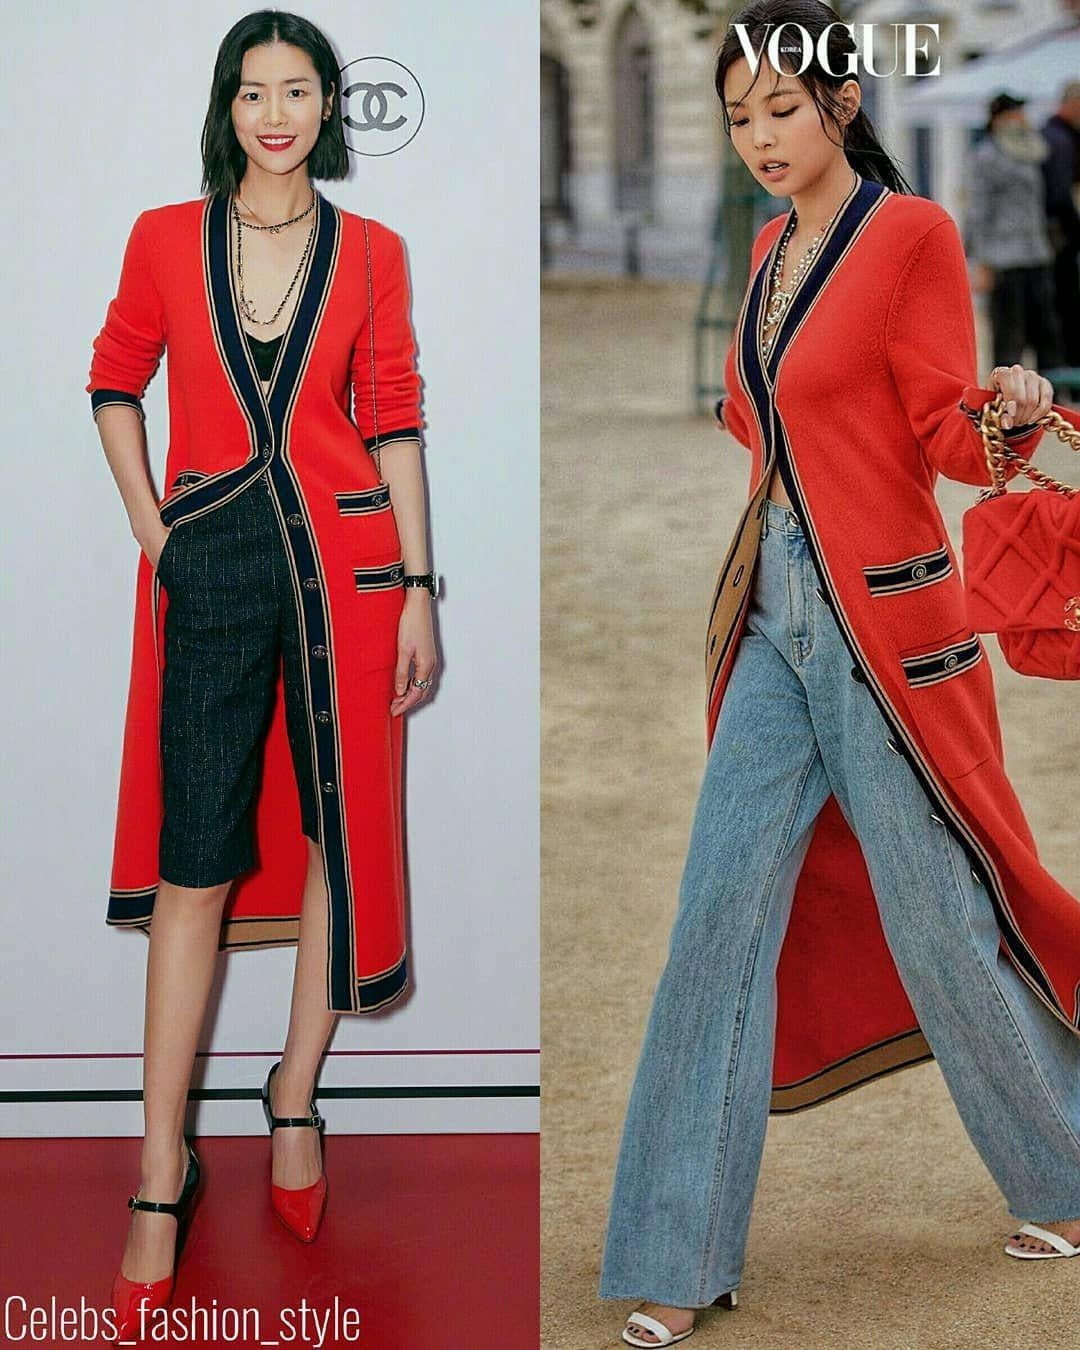 New stunning Chanel ecru cashmere maxi cardigan from Runway of 2020 Cruise Collection, 20C
As seen on Jennie Kim and in Emily in Paris movie !
Size mark 38 FR. Never worn.
- CC logo buttons
- iconic 4-pockets silhouette
- composition 100% cashmere